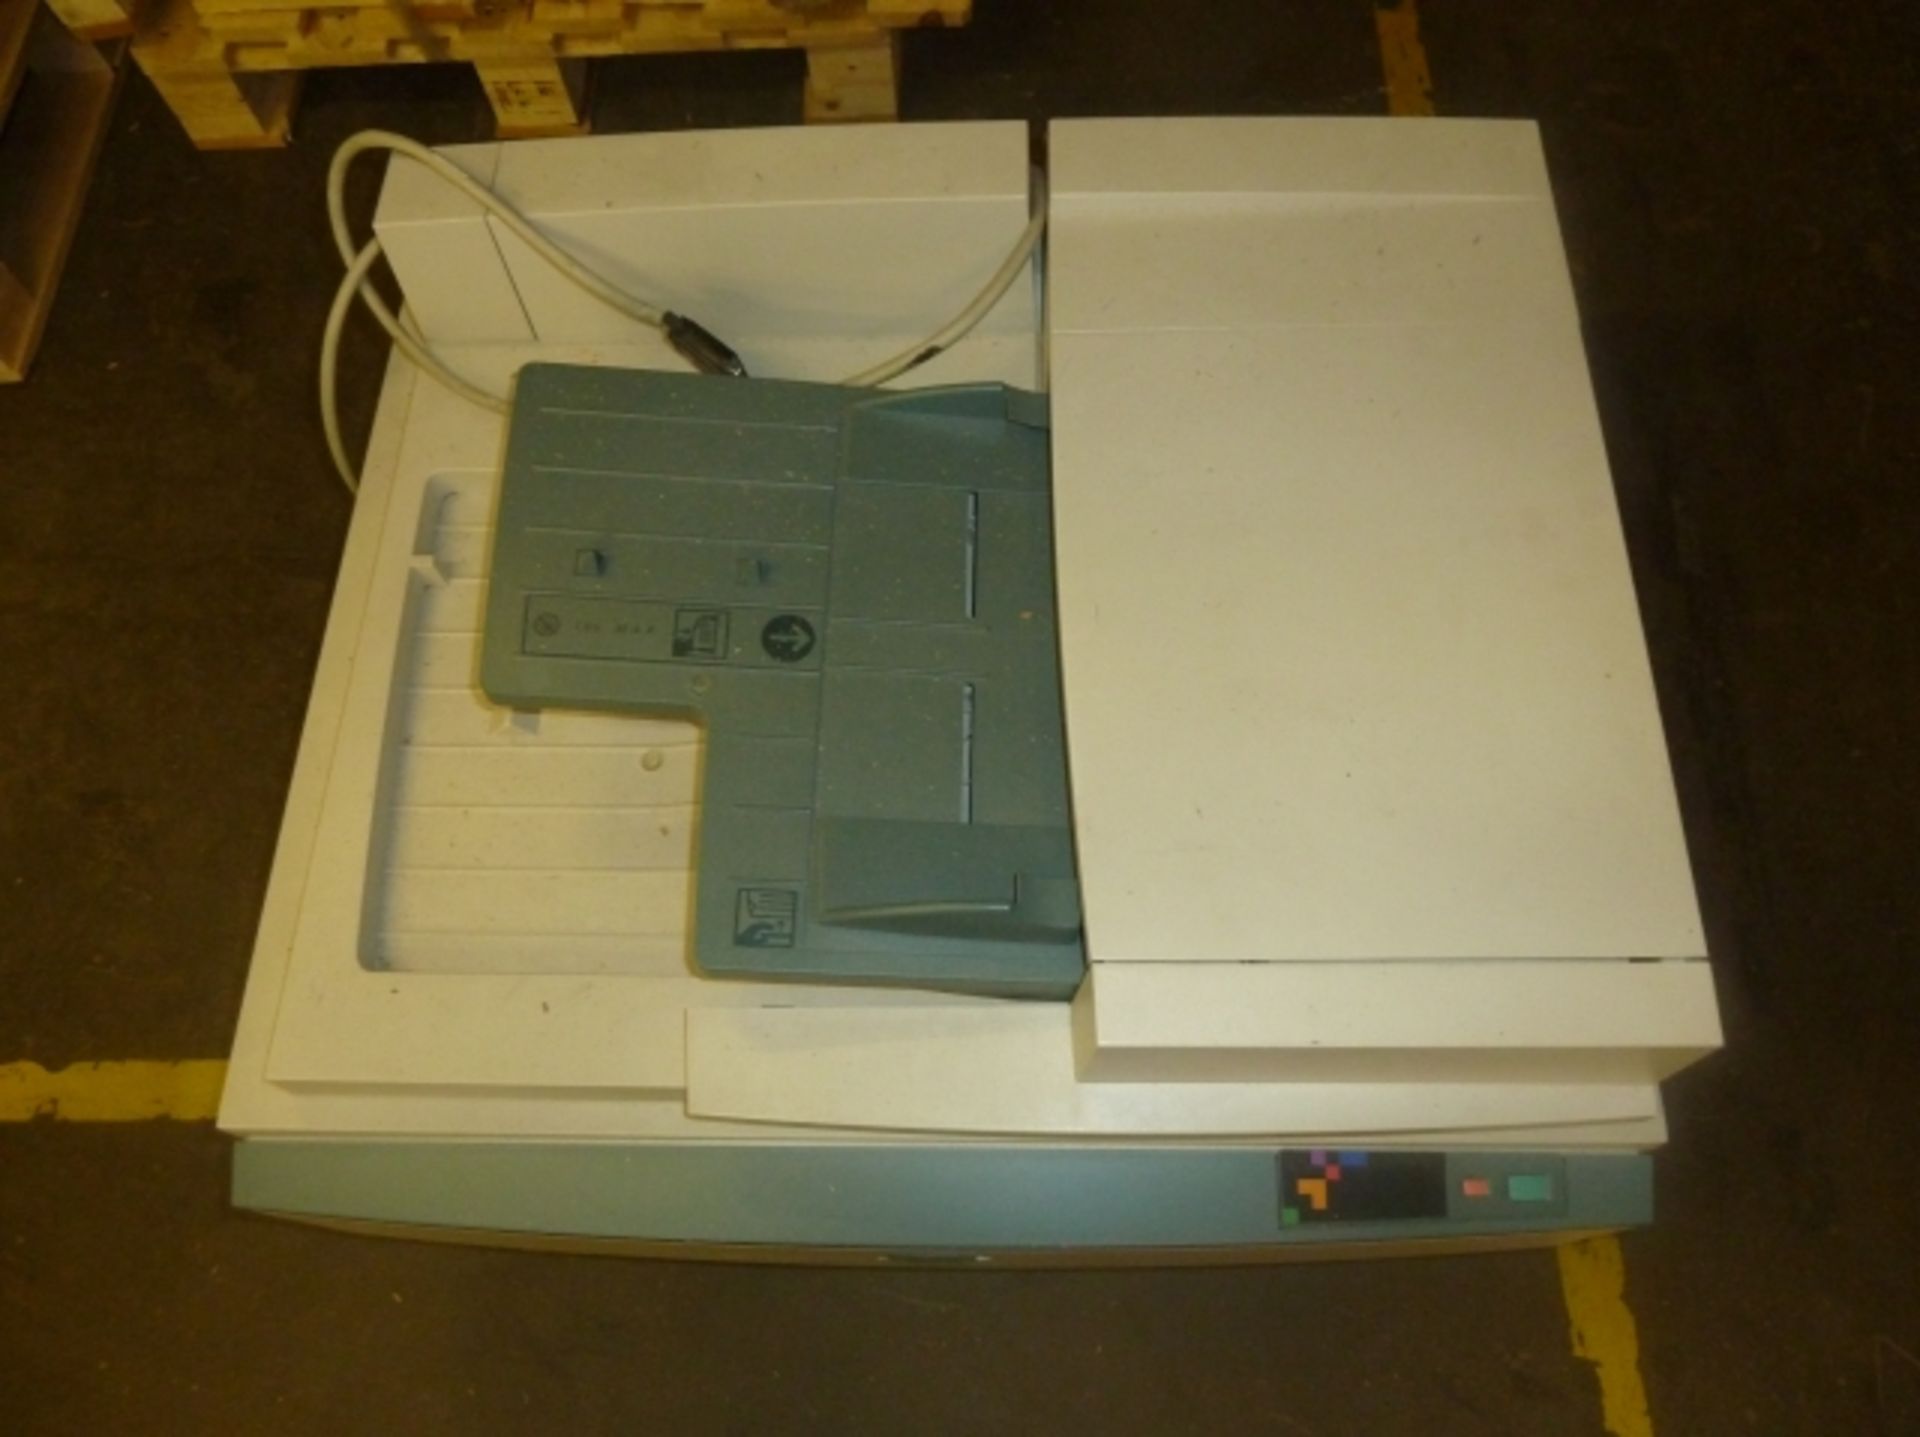 * Xerox 2000 Series EF6 Digipath Scanner. The council will remove the scanner from their building